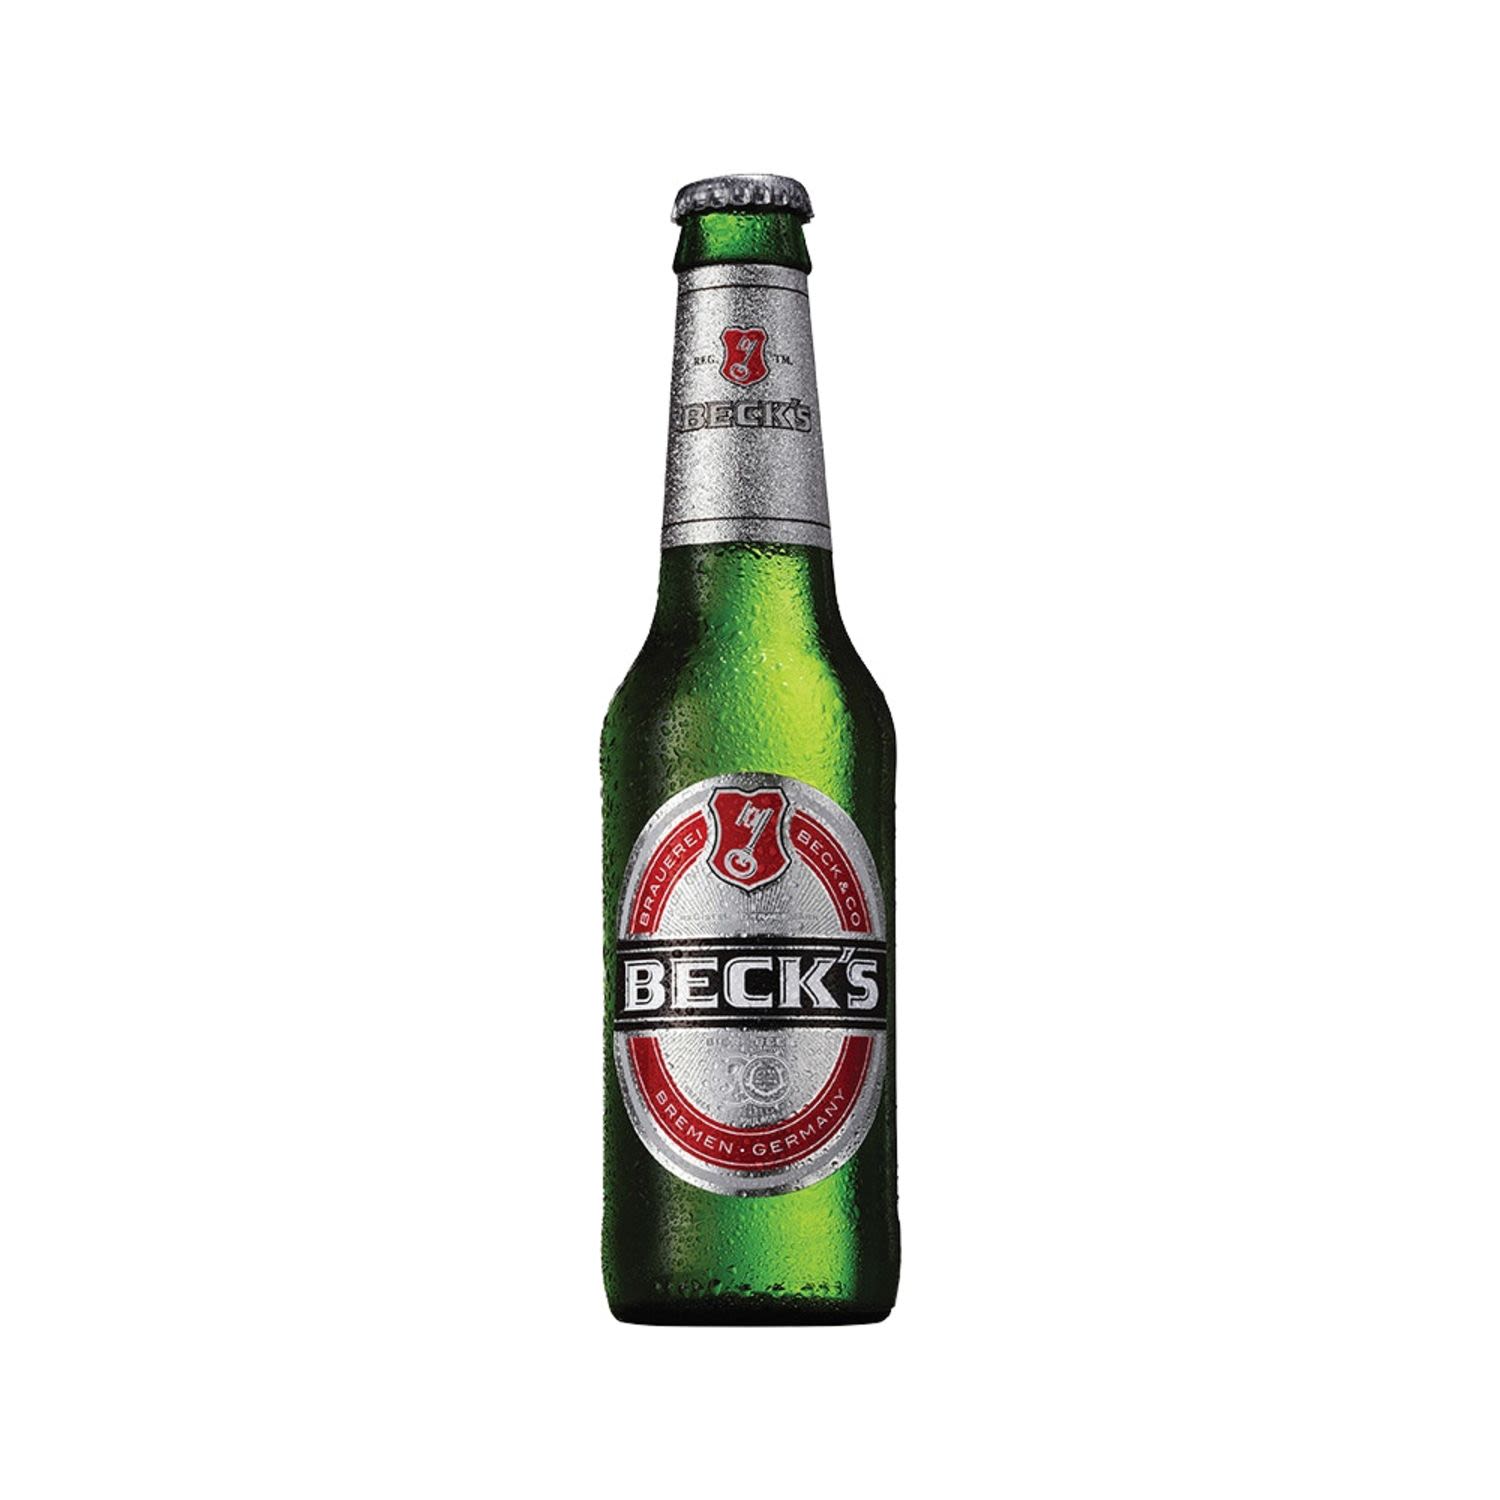 Beck's is a full-flavoured lager with a distinctive European malt taste. Known for it's refreshing and vibrant palate, a style that dates back many centuries. Beck's is best enjoyed with great friends and warm afternoons.<br /> <br />Alcohol Volume: 5.00%<br /><br />Pack Format: Bottle<br /><br />Standard Drinks: 1.3</br /><br />Pack Type: Bottle<br /><br />Country of Origin: Germany<br />